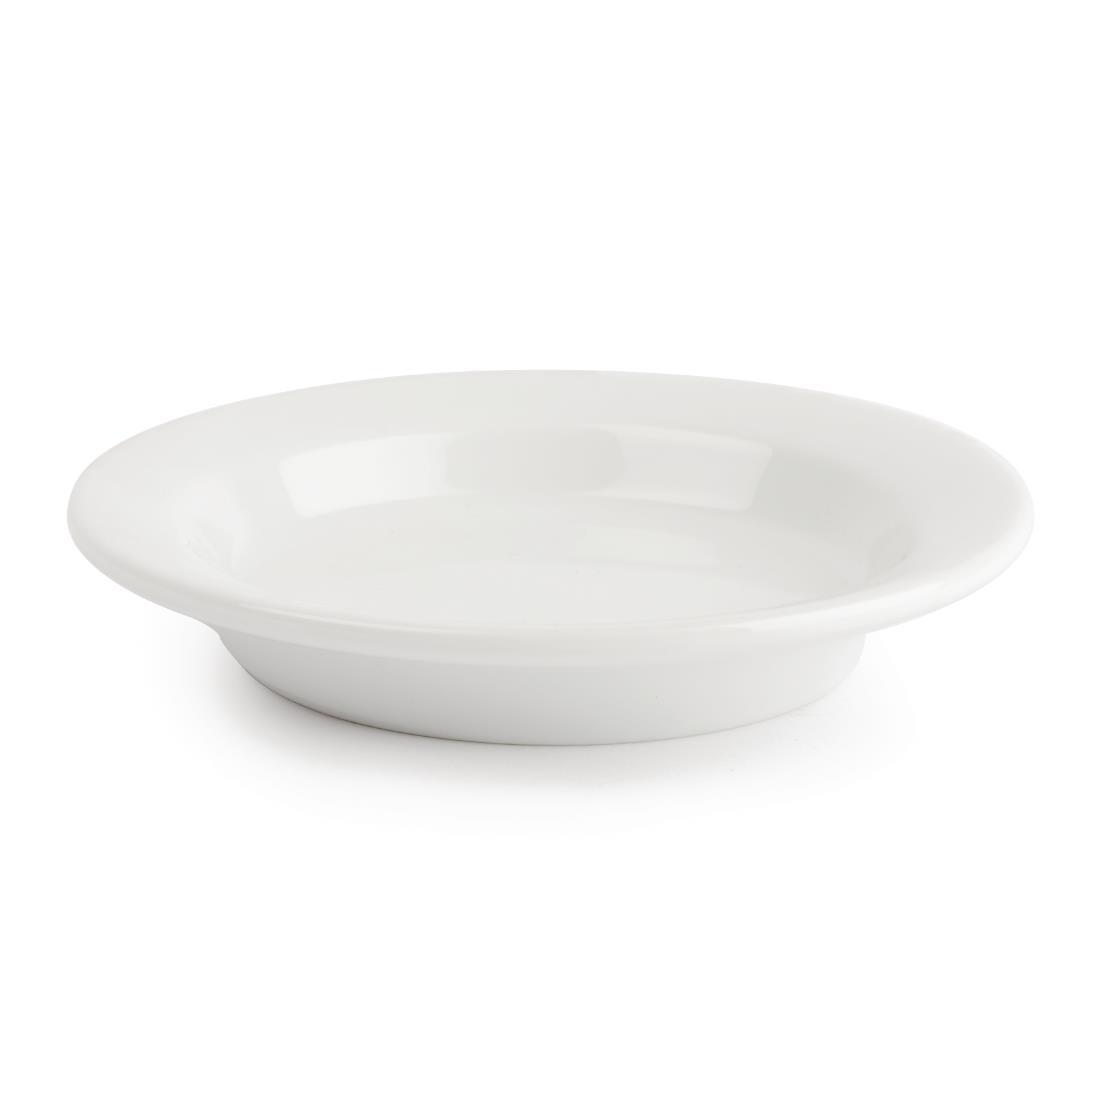 Royal Porcelain Classic White Butter Dishes (Pack of 48) - CG067  - 2